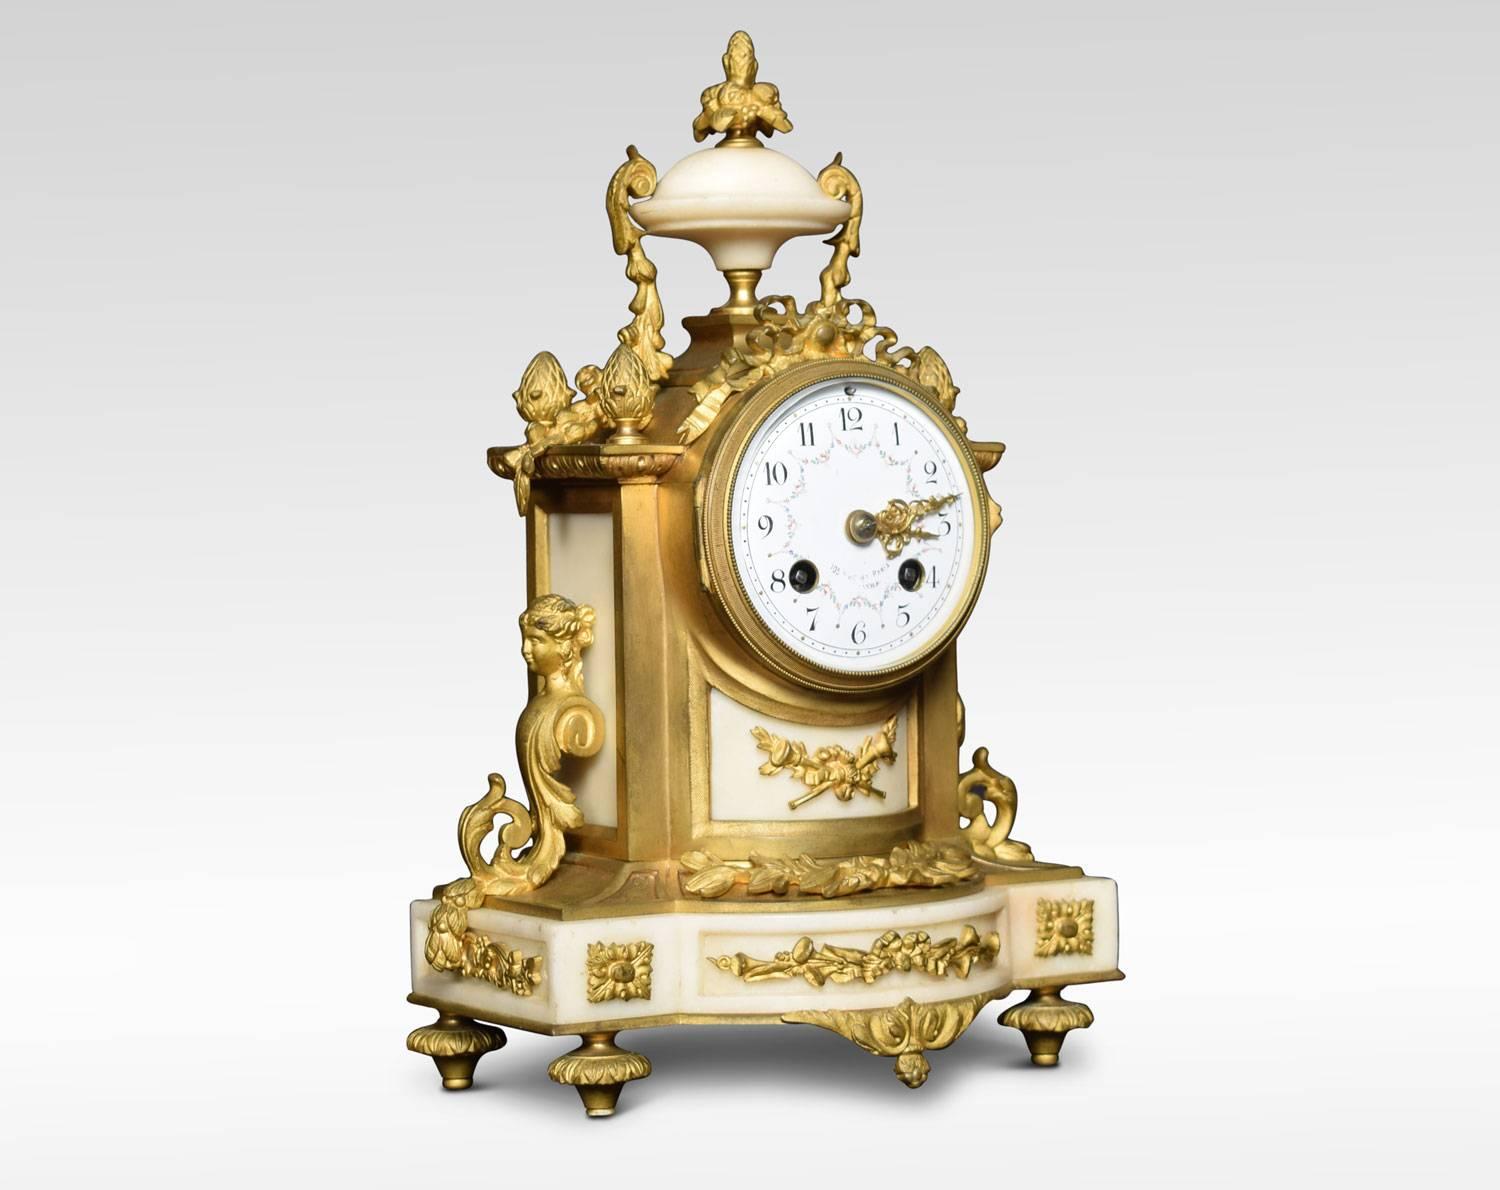 The clock having a 3.5-inch dial with white-enameled chapter ring and floral painted dial, the two-train Mougin eight day movement striking on a bell, the clock housed in white marble case summoned with scrolling maddens and acorn finials. All